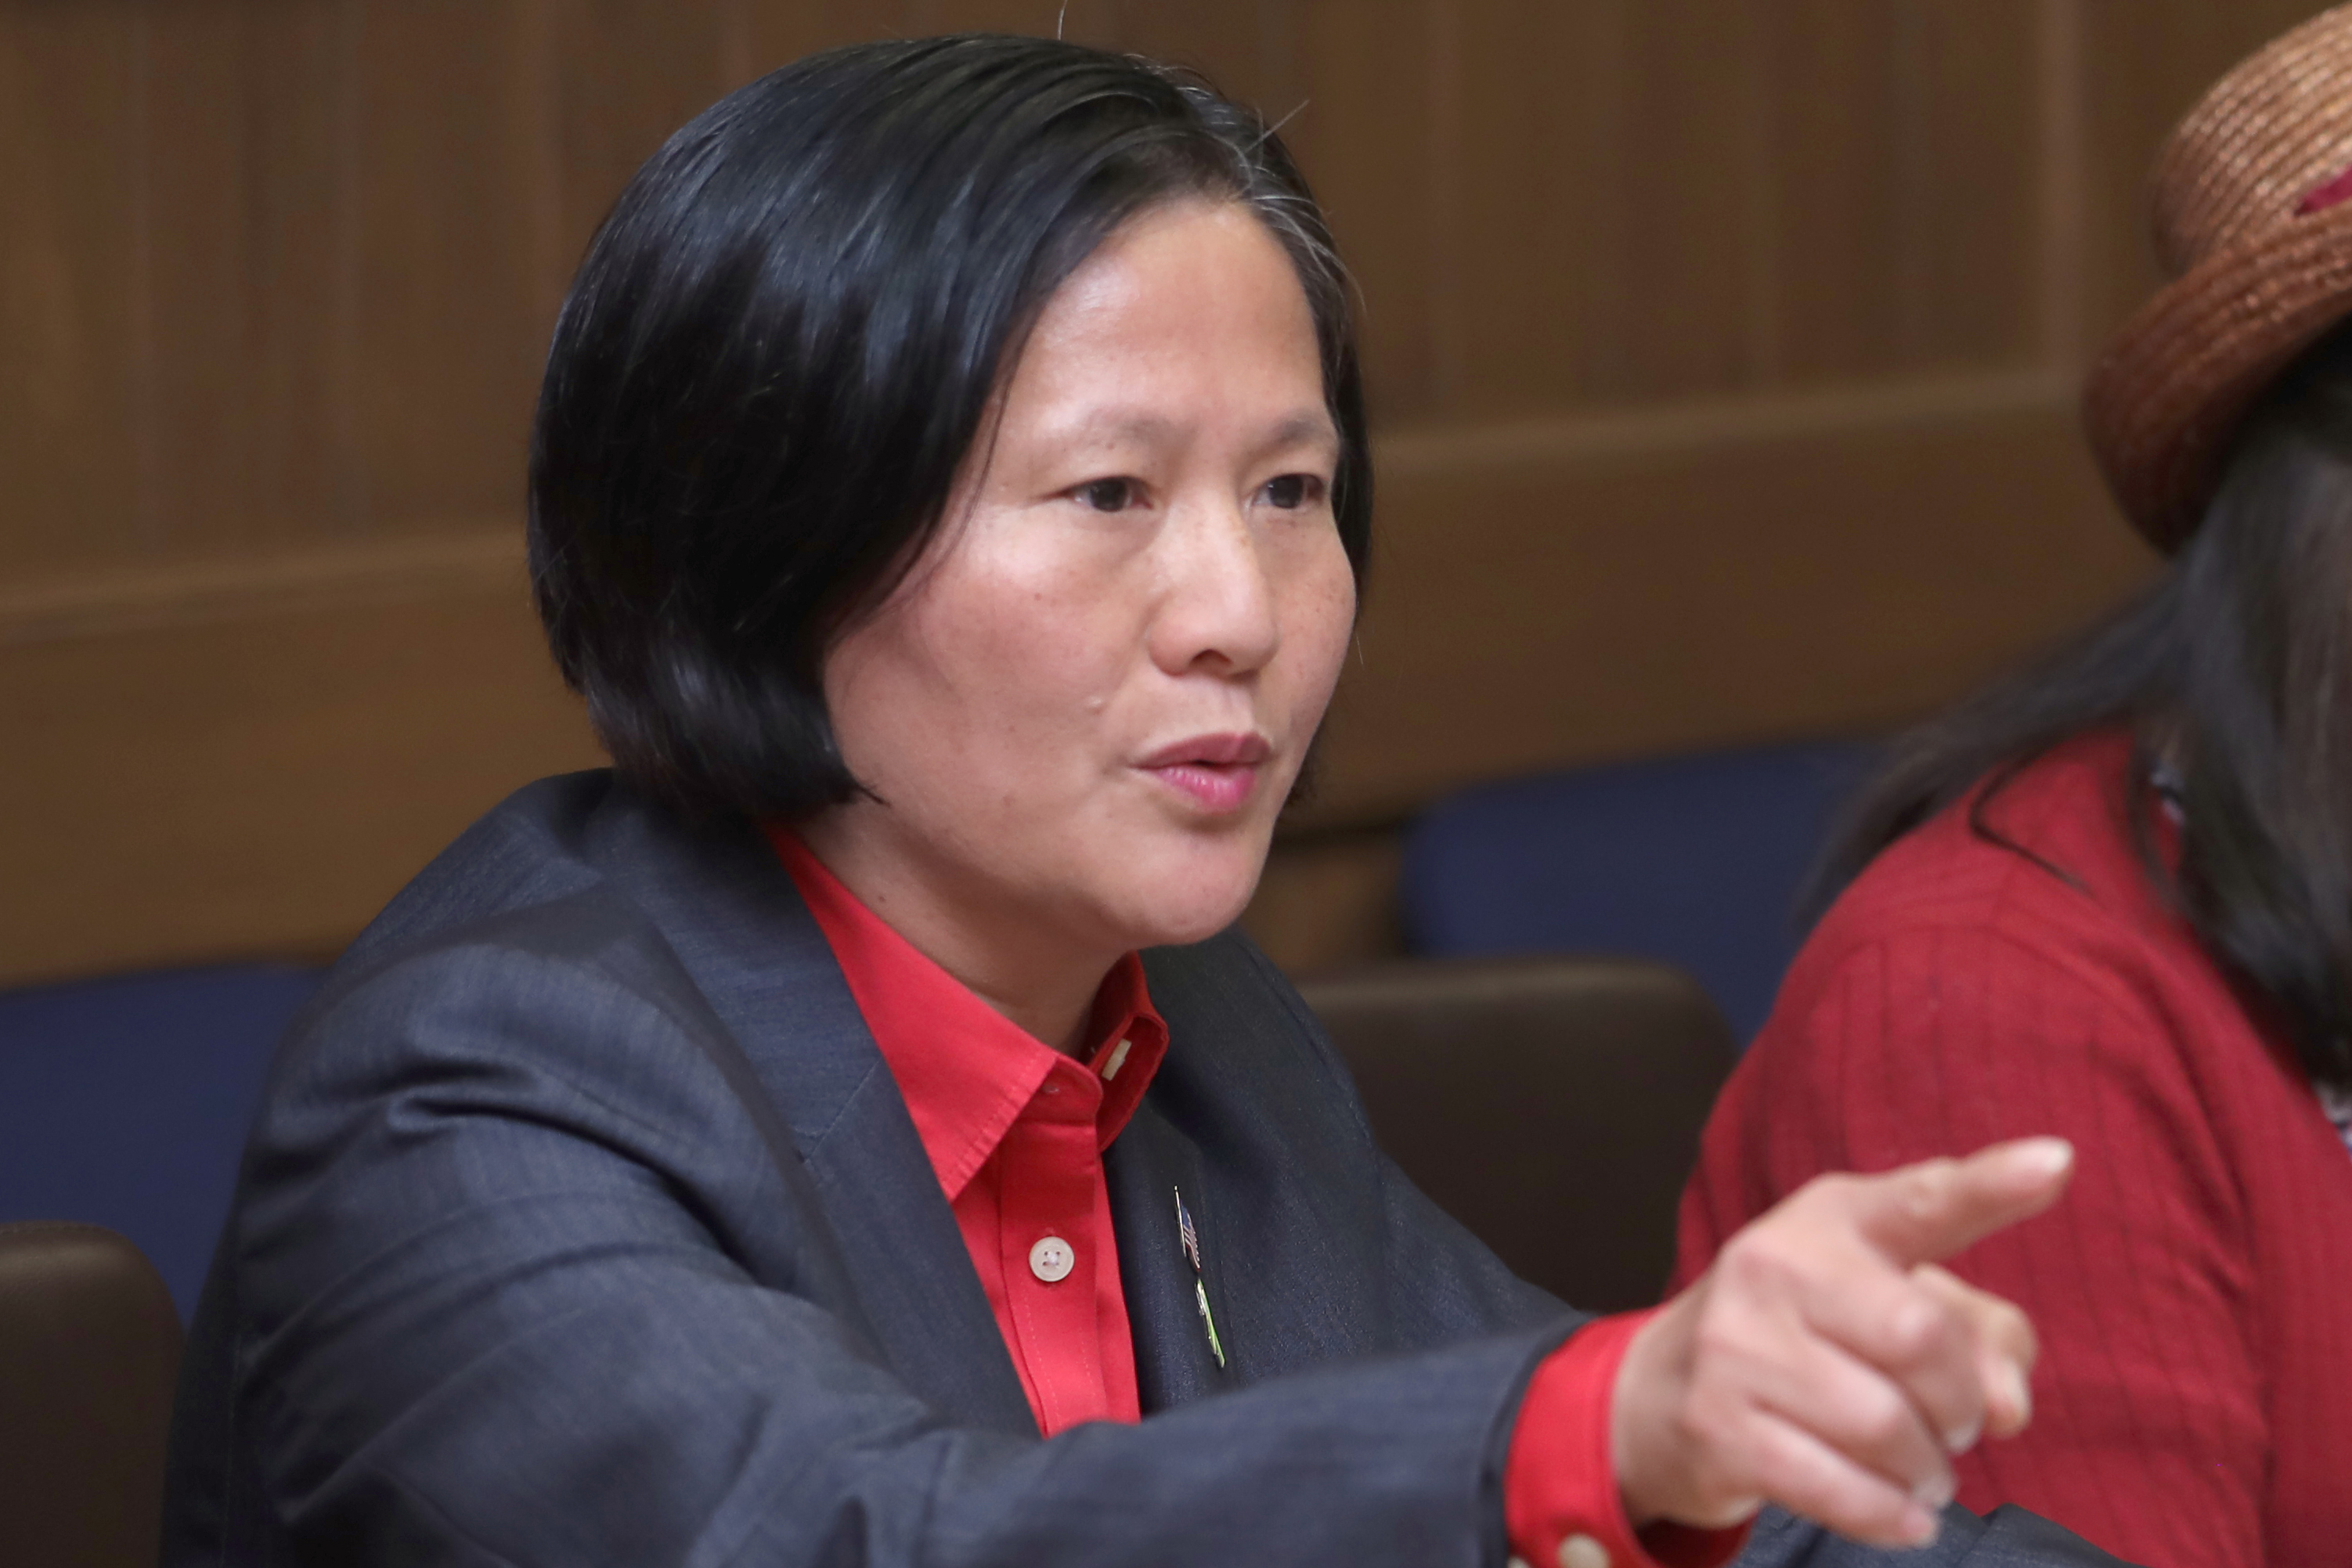 A woman with short black hair, wearing a red blouse and dark blazer, gestures while speaking to someone off-camera.